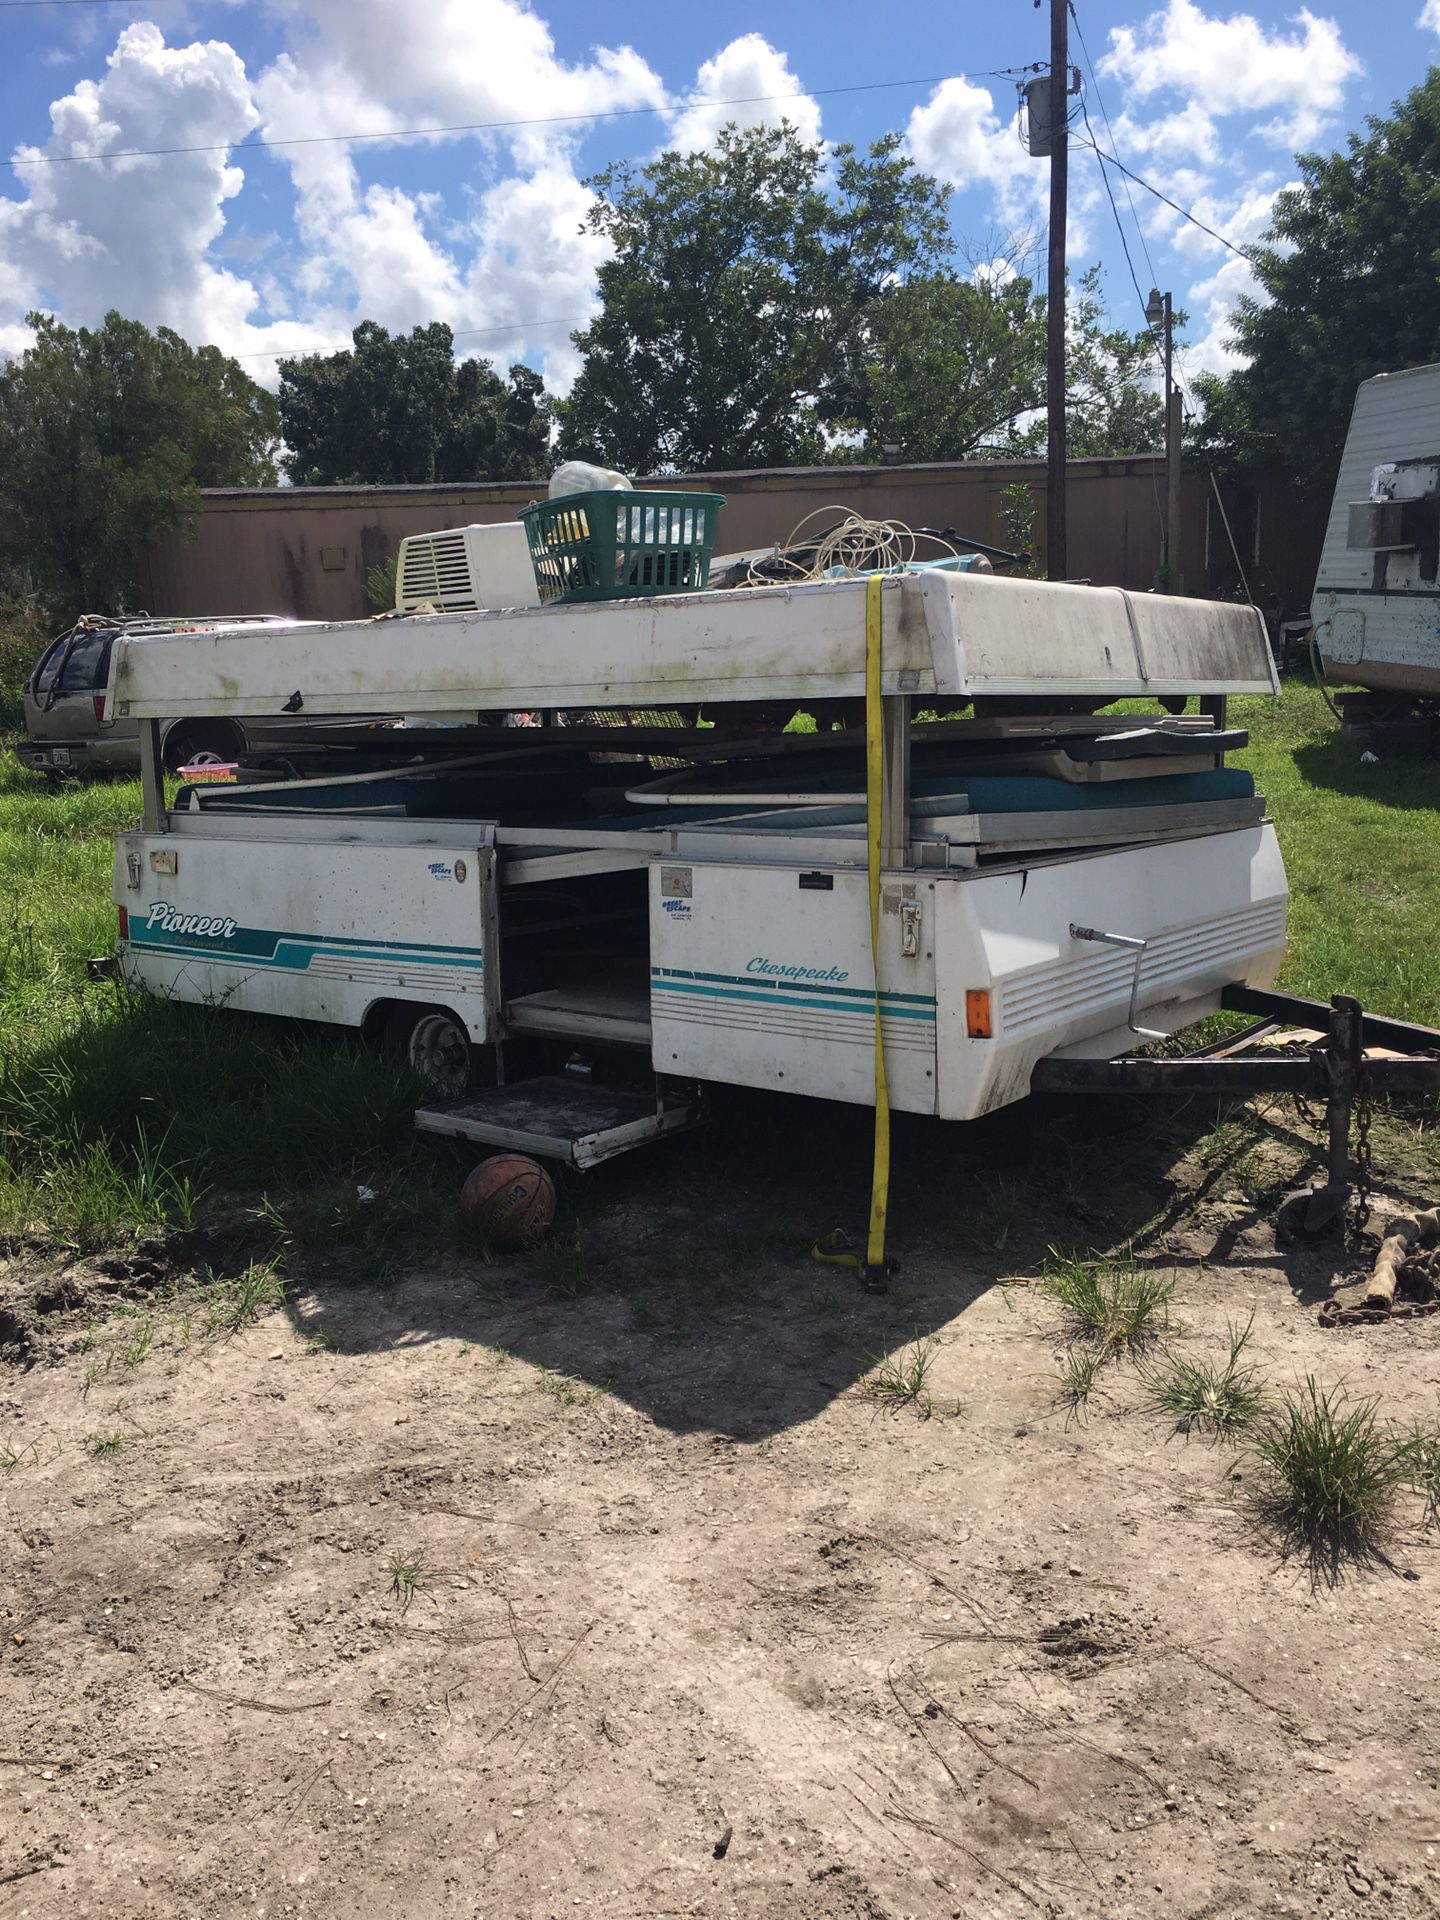 Pop up camper or turn into utility lawn trailer